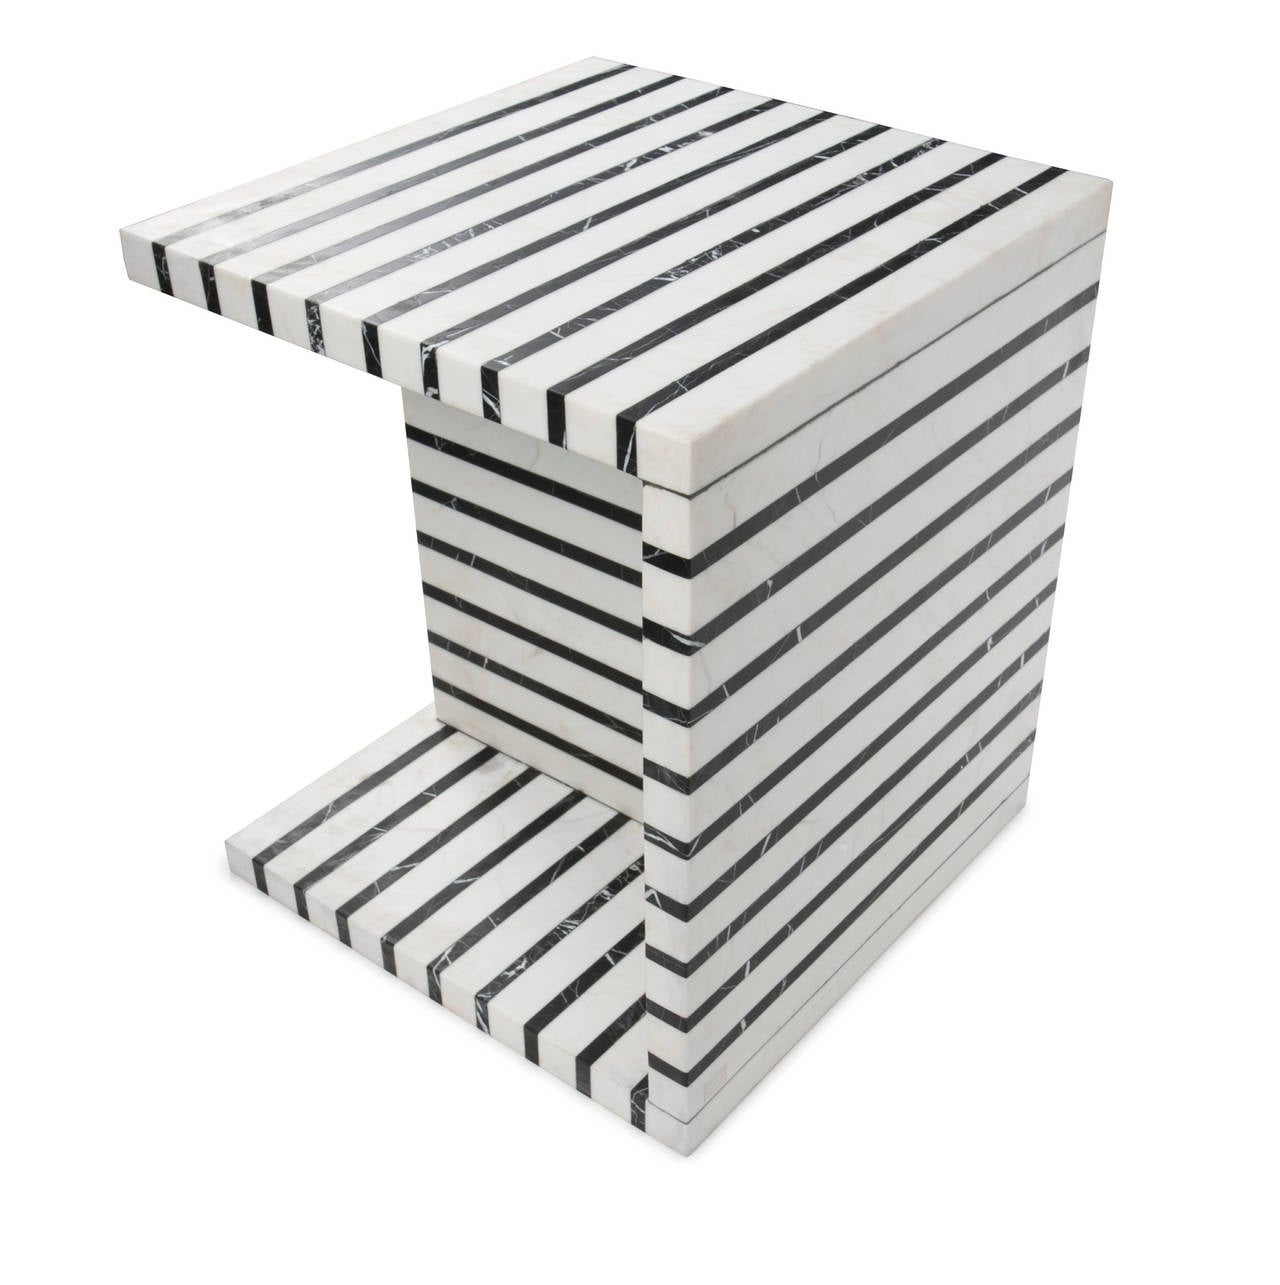 Exemplifying Kelly’s love of mixed marbles, this black and white striped occasional or side table is perfectly proportioned for use in a living room or lounge arrangement. Each of the slabs that form the table are executed in alternating layers of